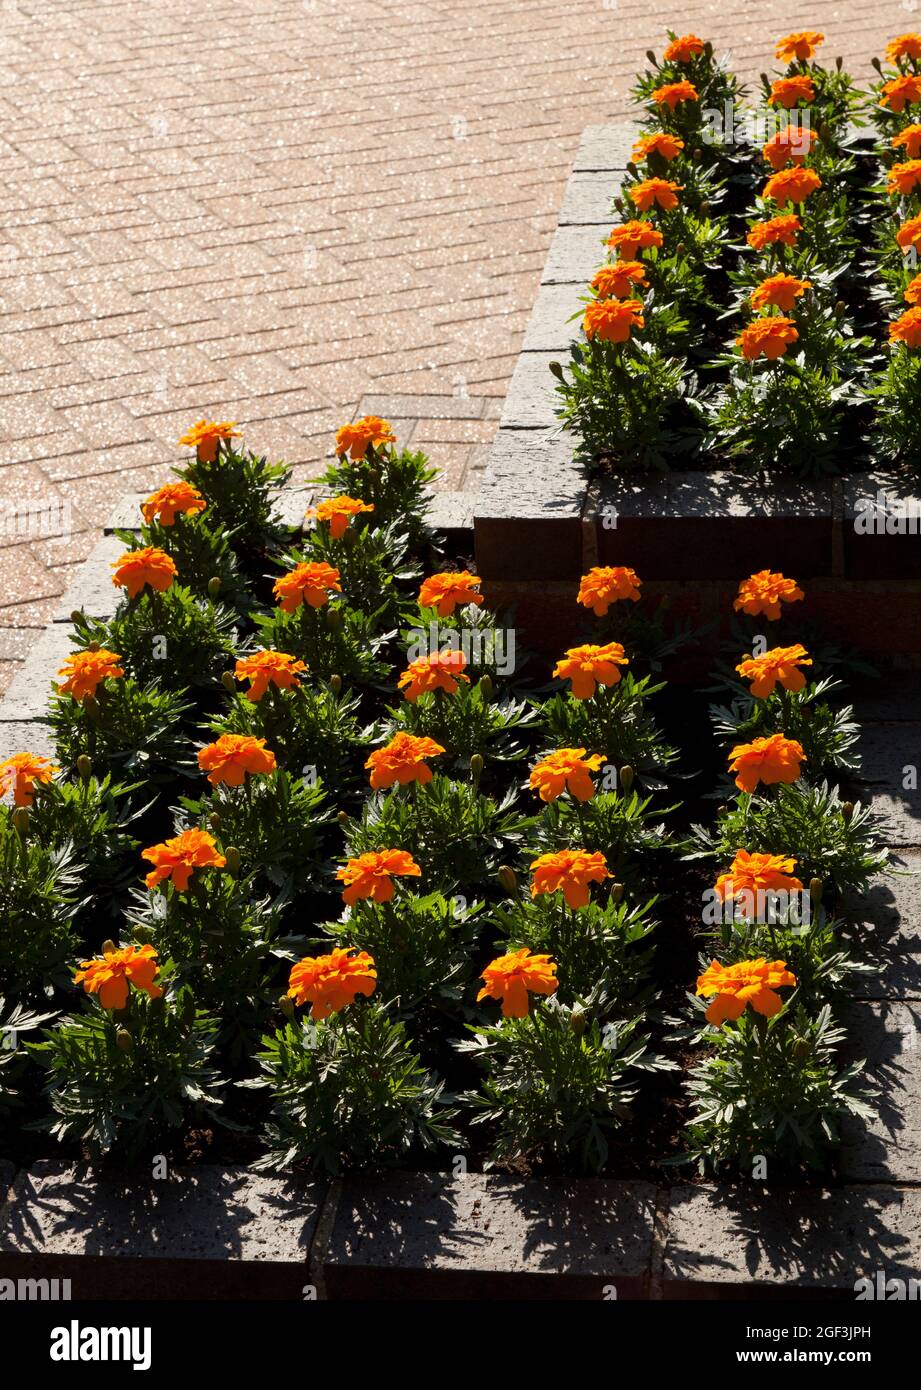 Raised Flower Bed on a Patio Stock Photo